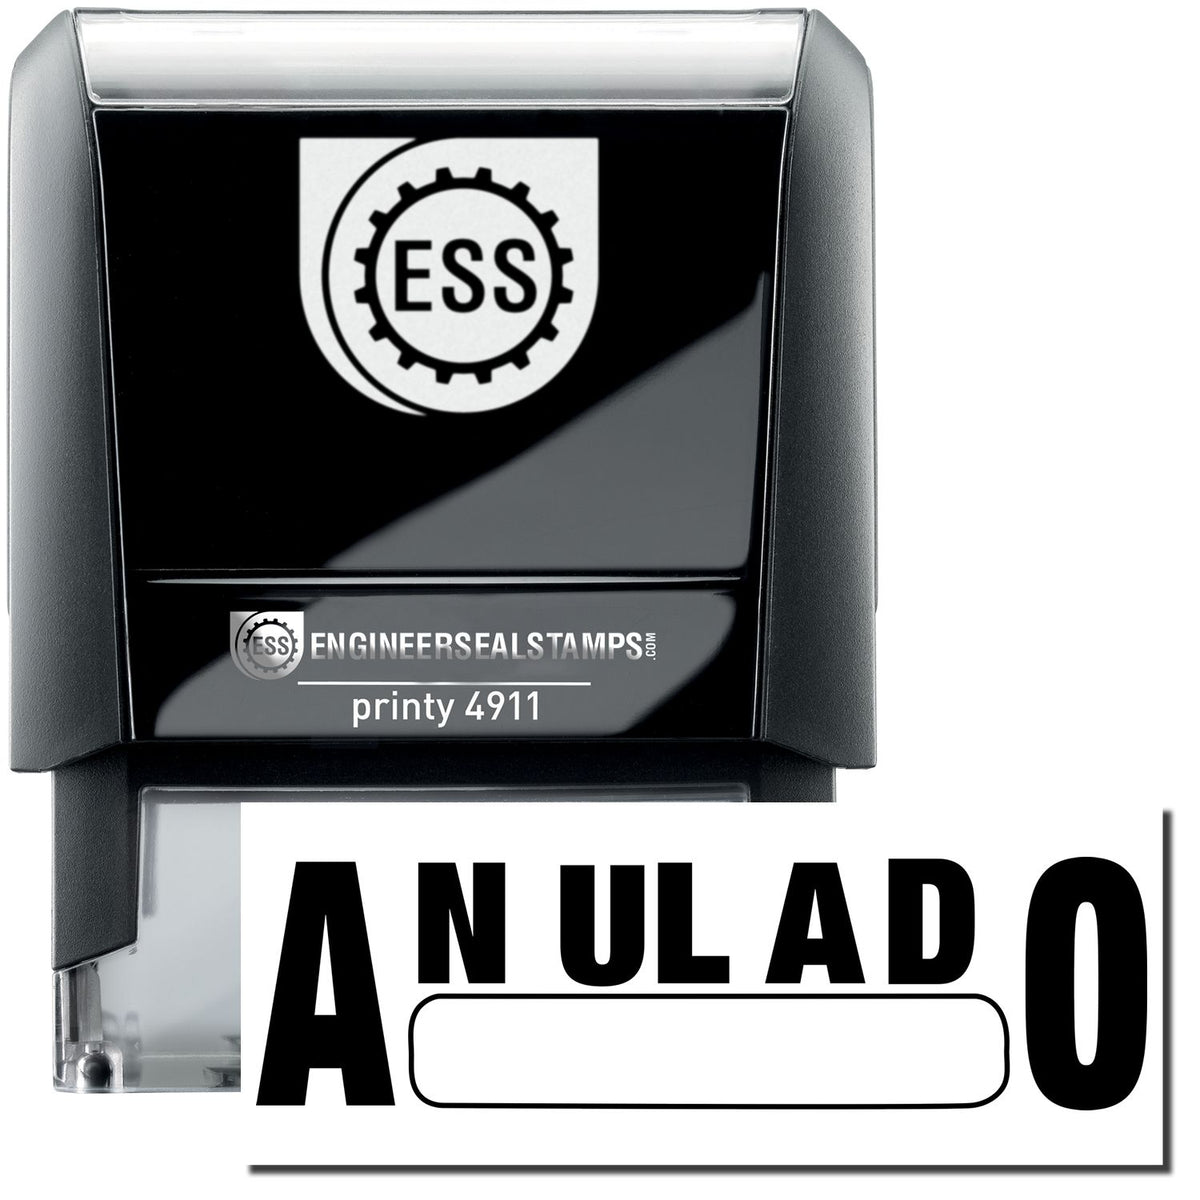 A self-inking stamp with a stamped image showing how the text &quot;ANULADO&quot; with a box under it is displayed after stamping.